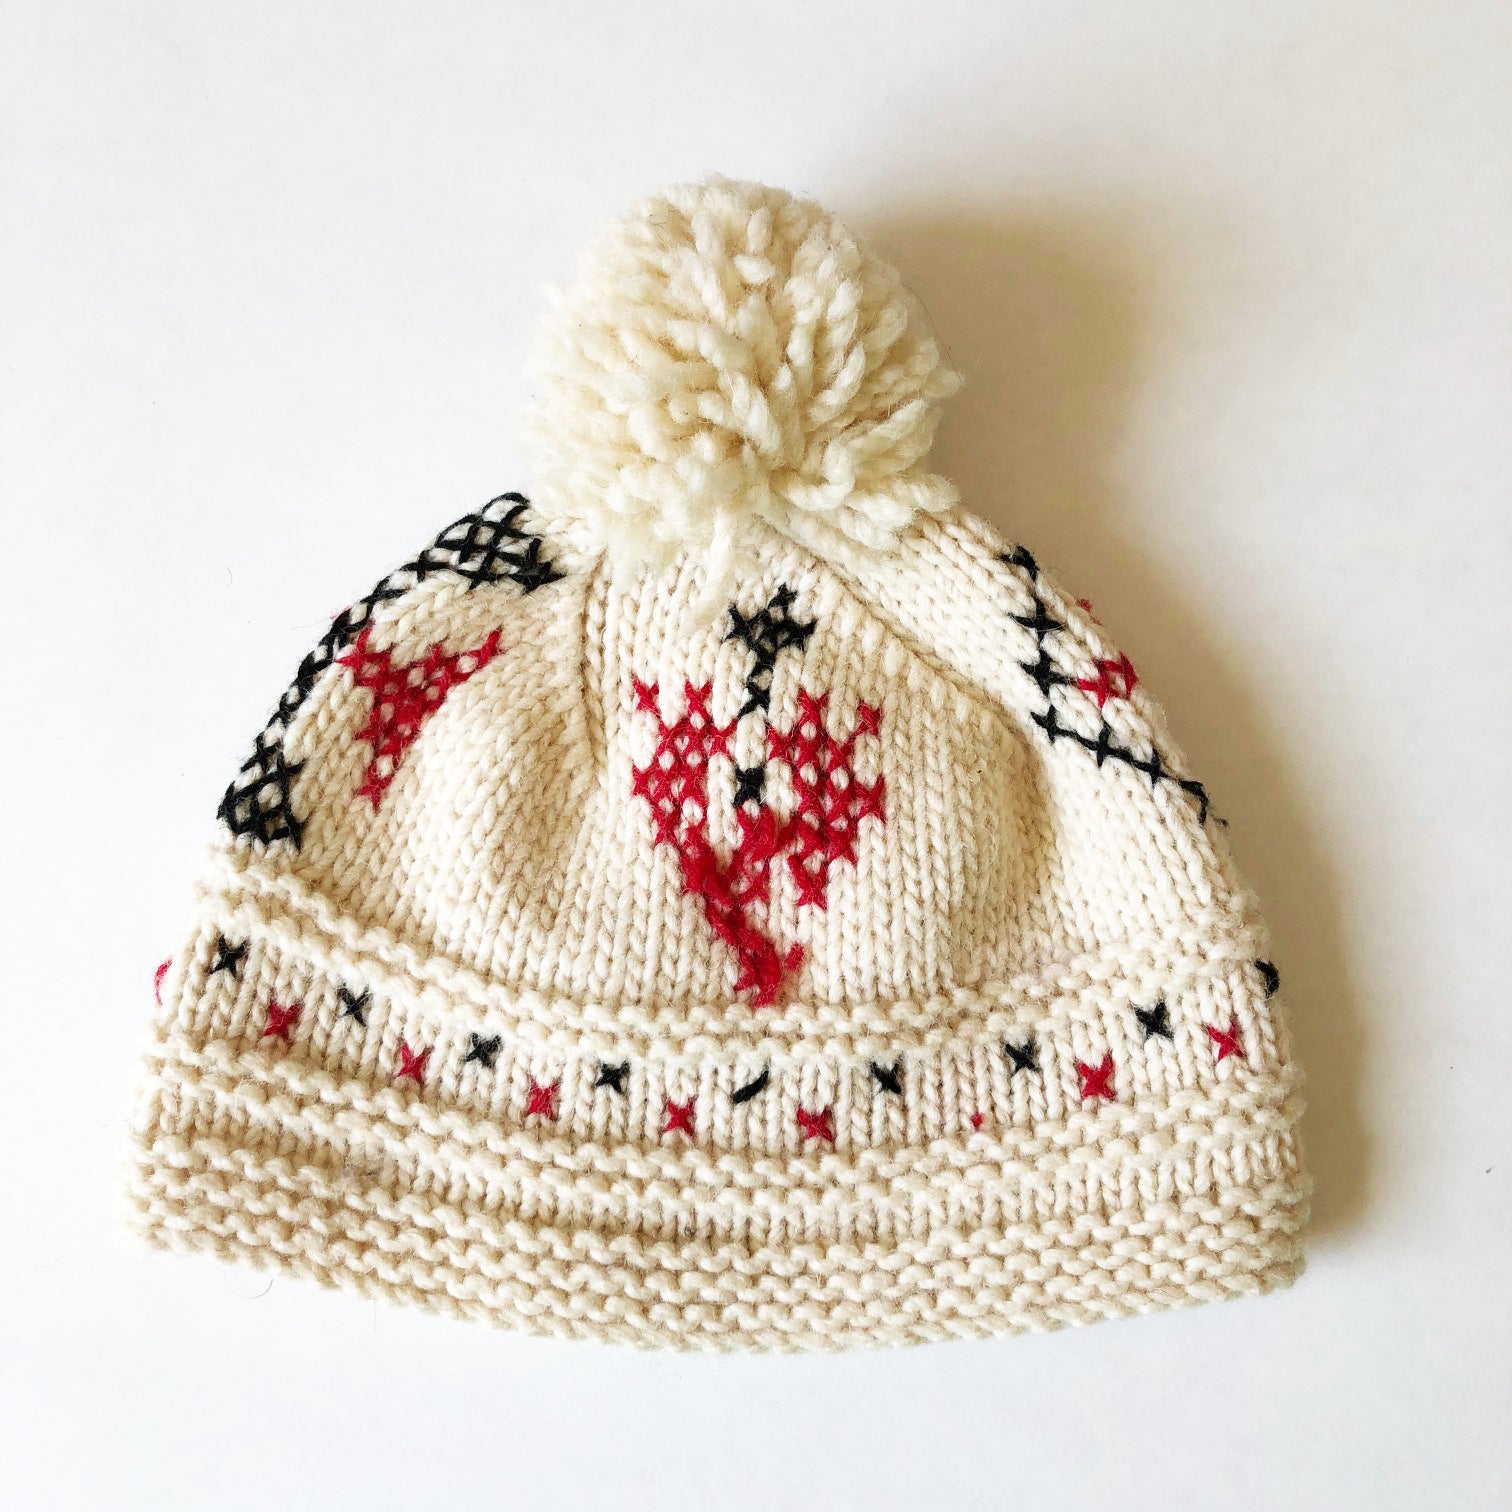 Hand knit Vintage Embroidered Hat size 12-24 months.